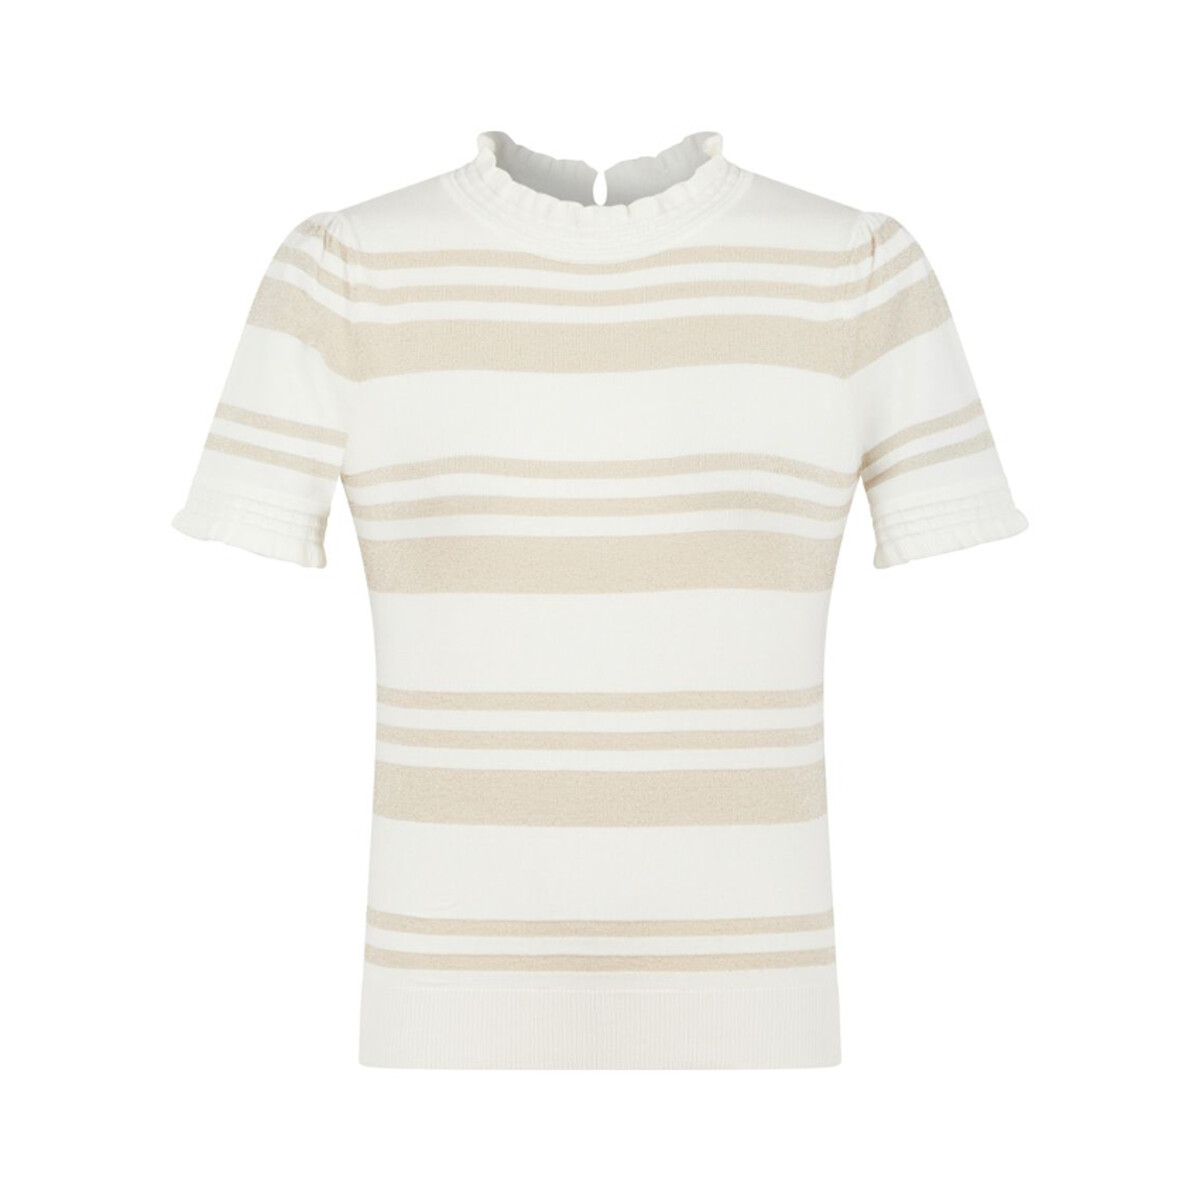 Image of Striped Short Sleeve Jumper with Gathered Collar and Sleeves